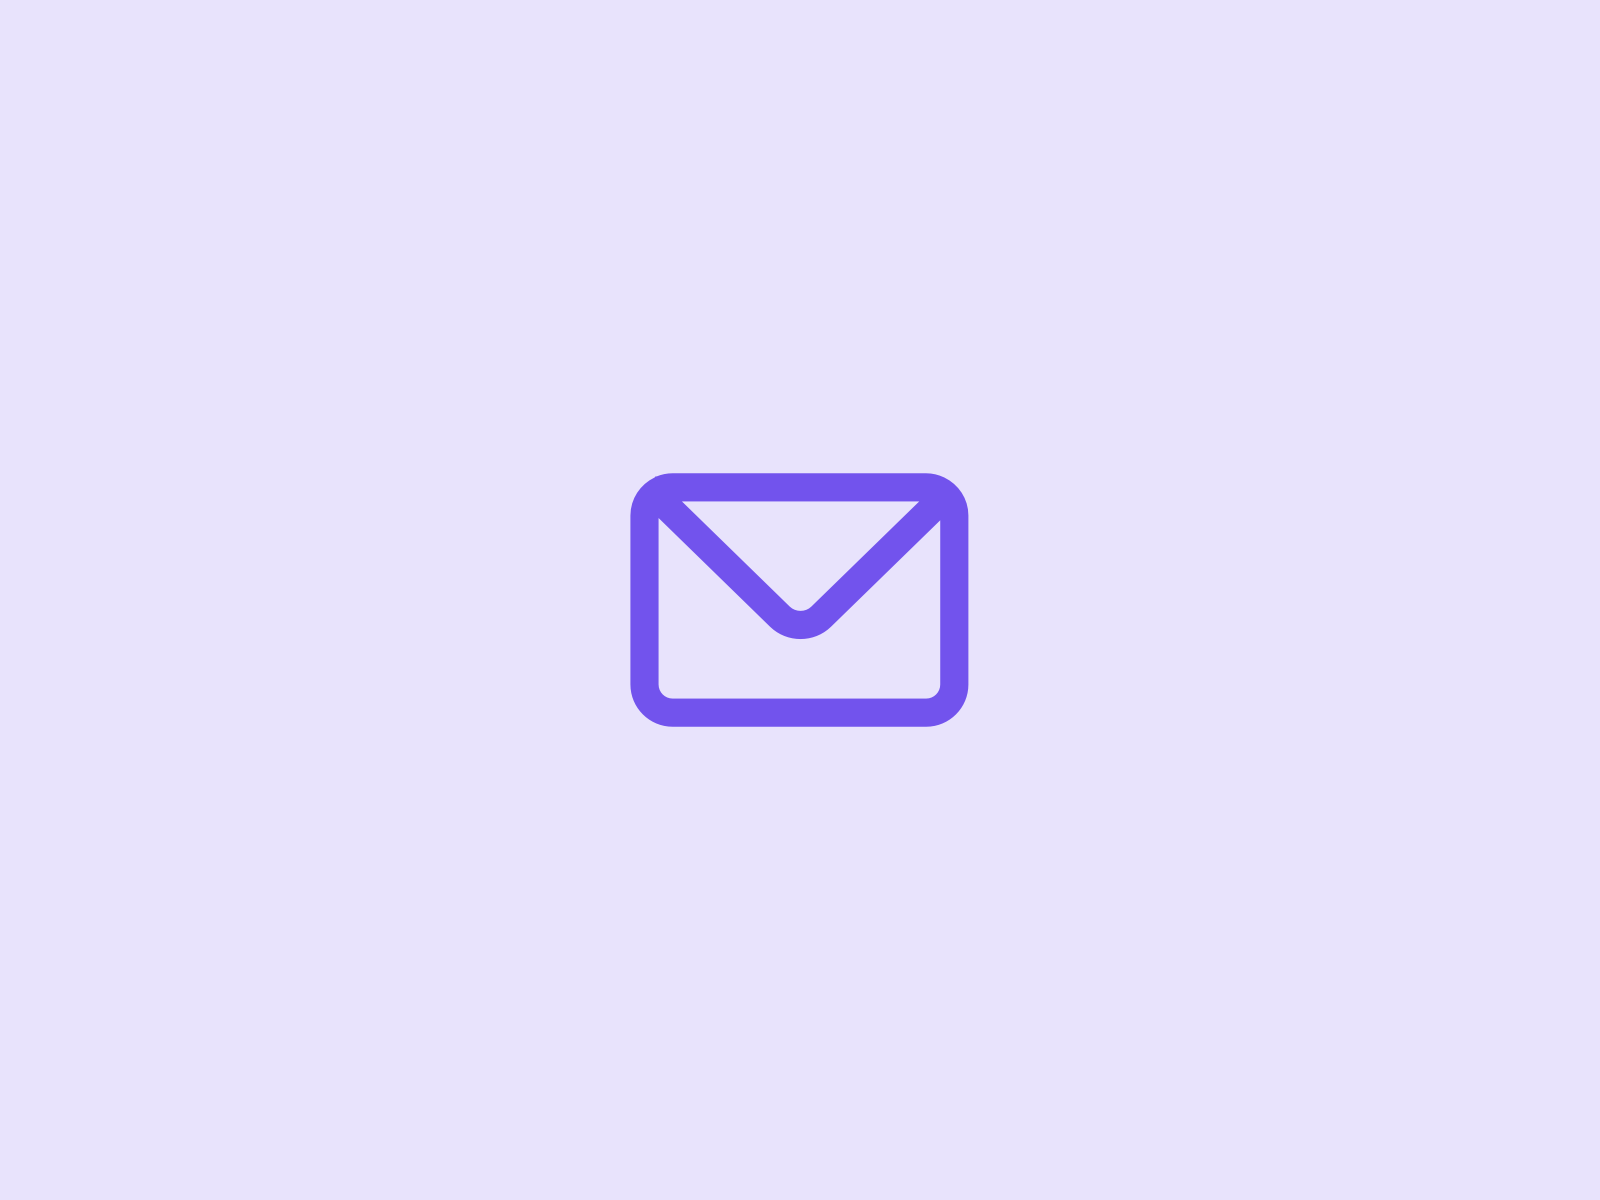 In this picture we see a classic icon from the field of user interface design is the mail icon. It shows a letter and creates the link to the physical letter and the sending of a message.